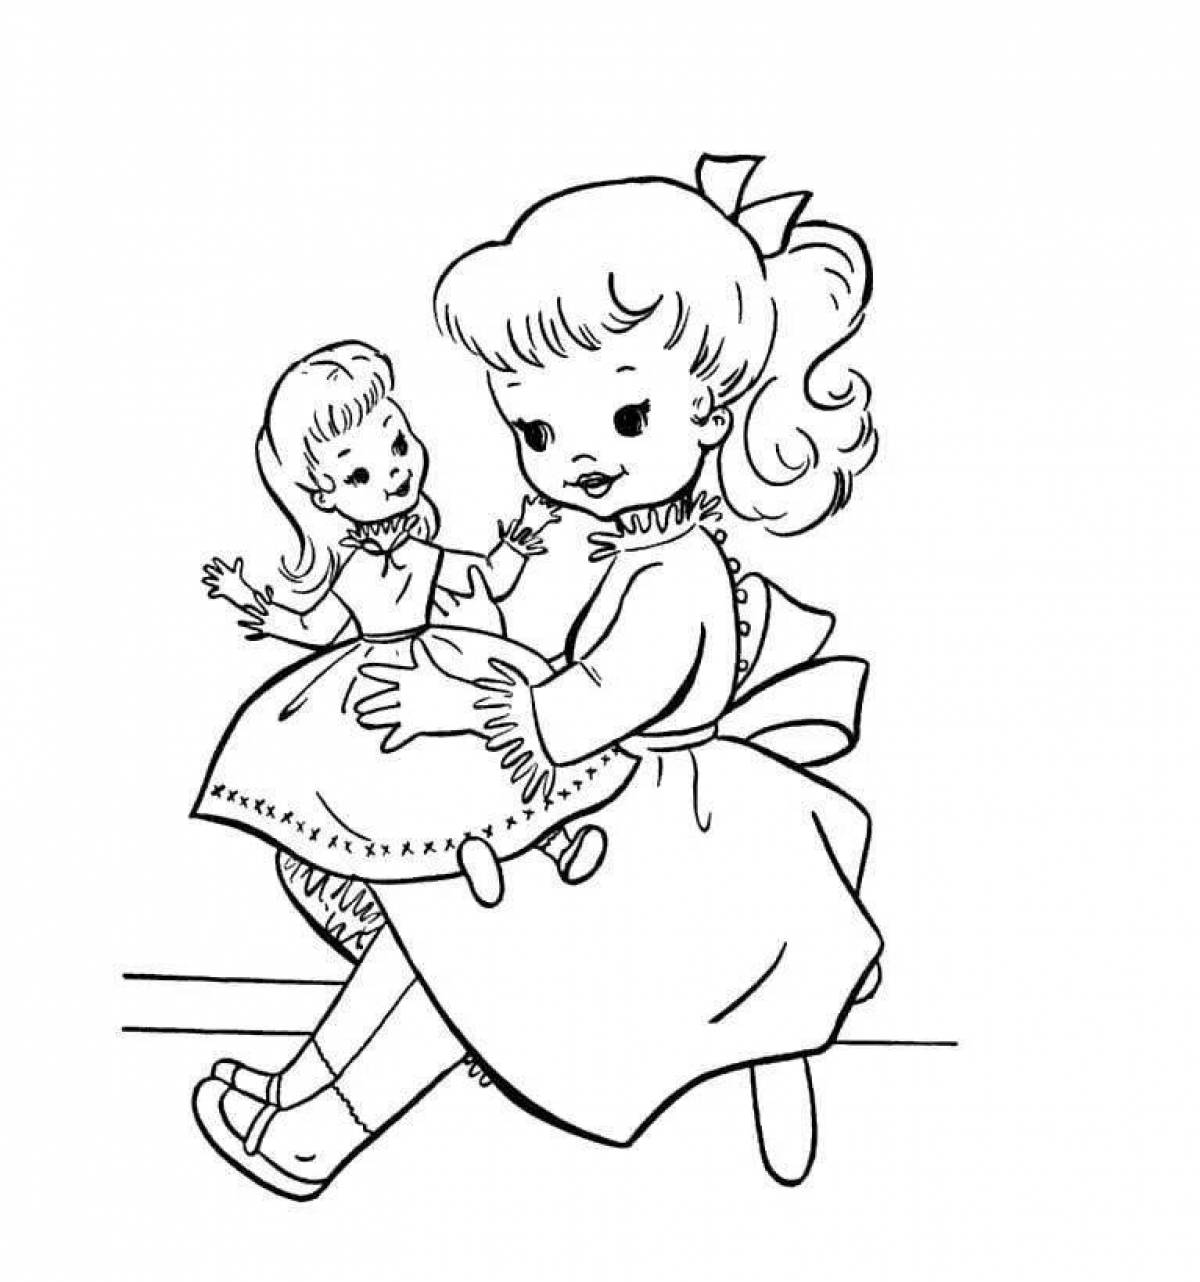 Coloring book awesome doll drawing